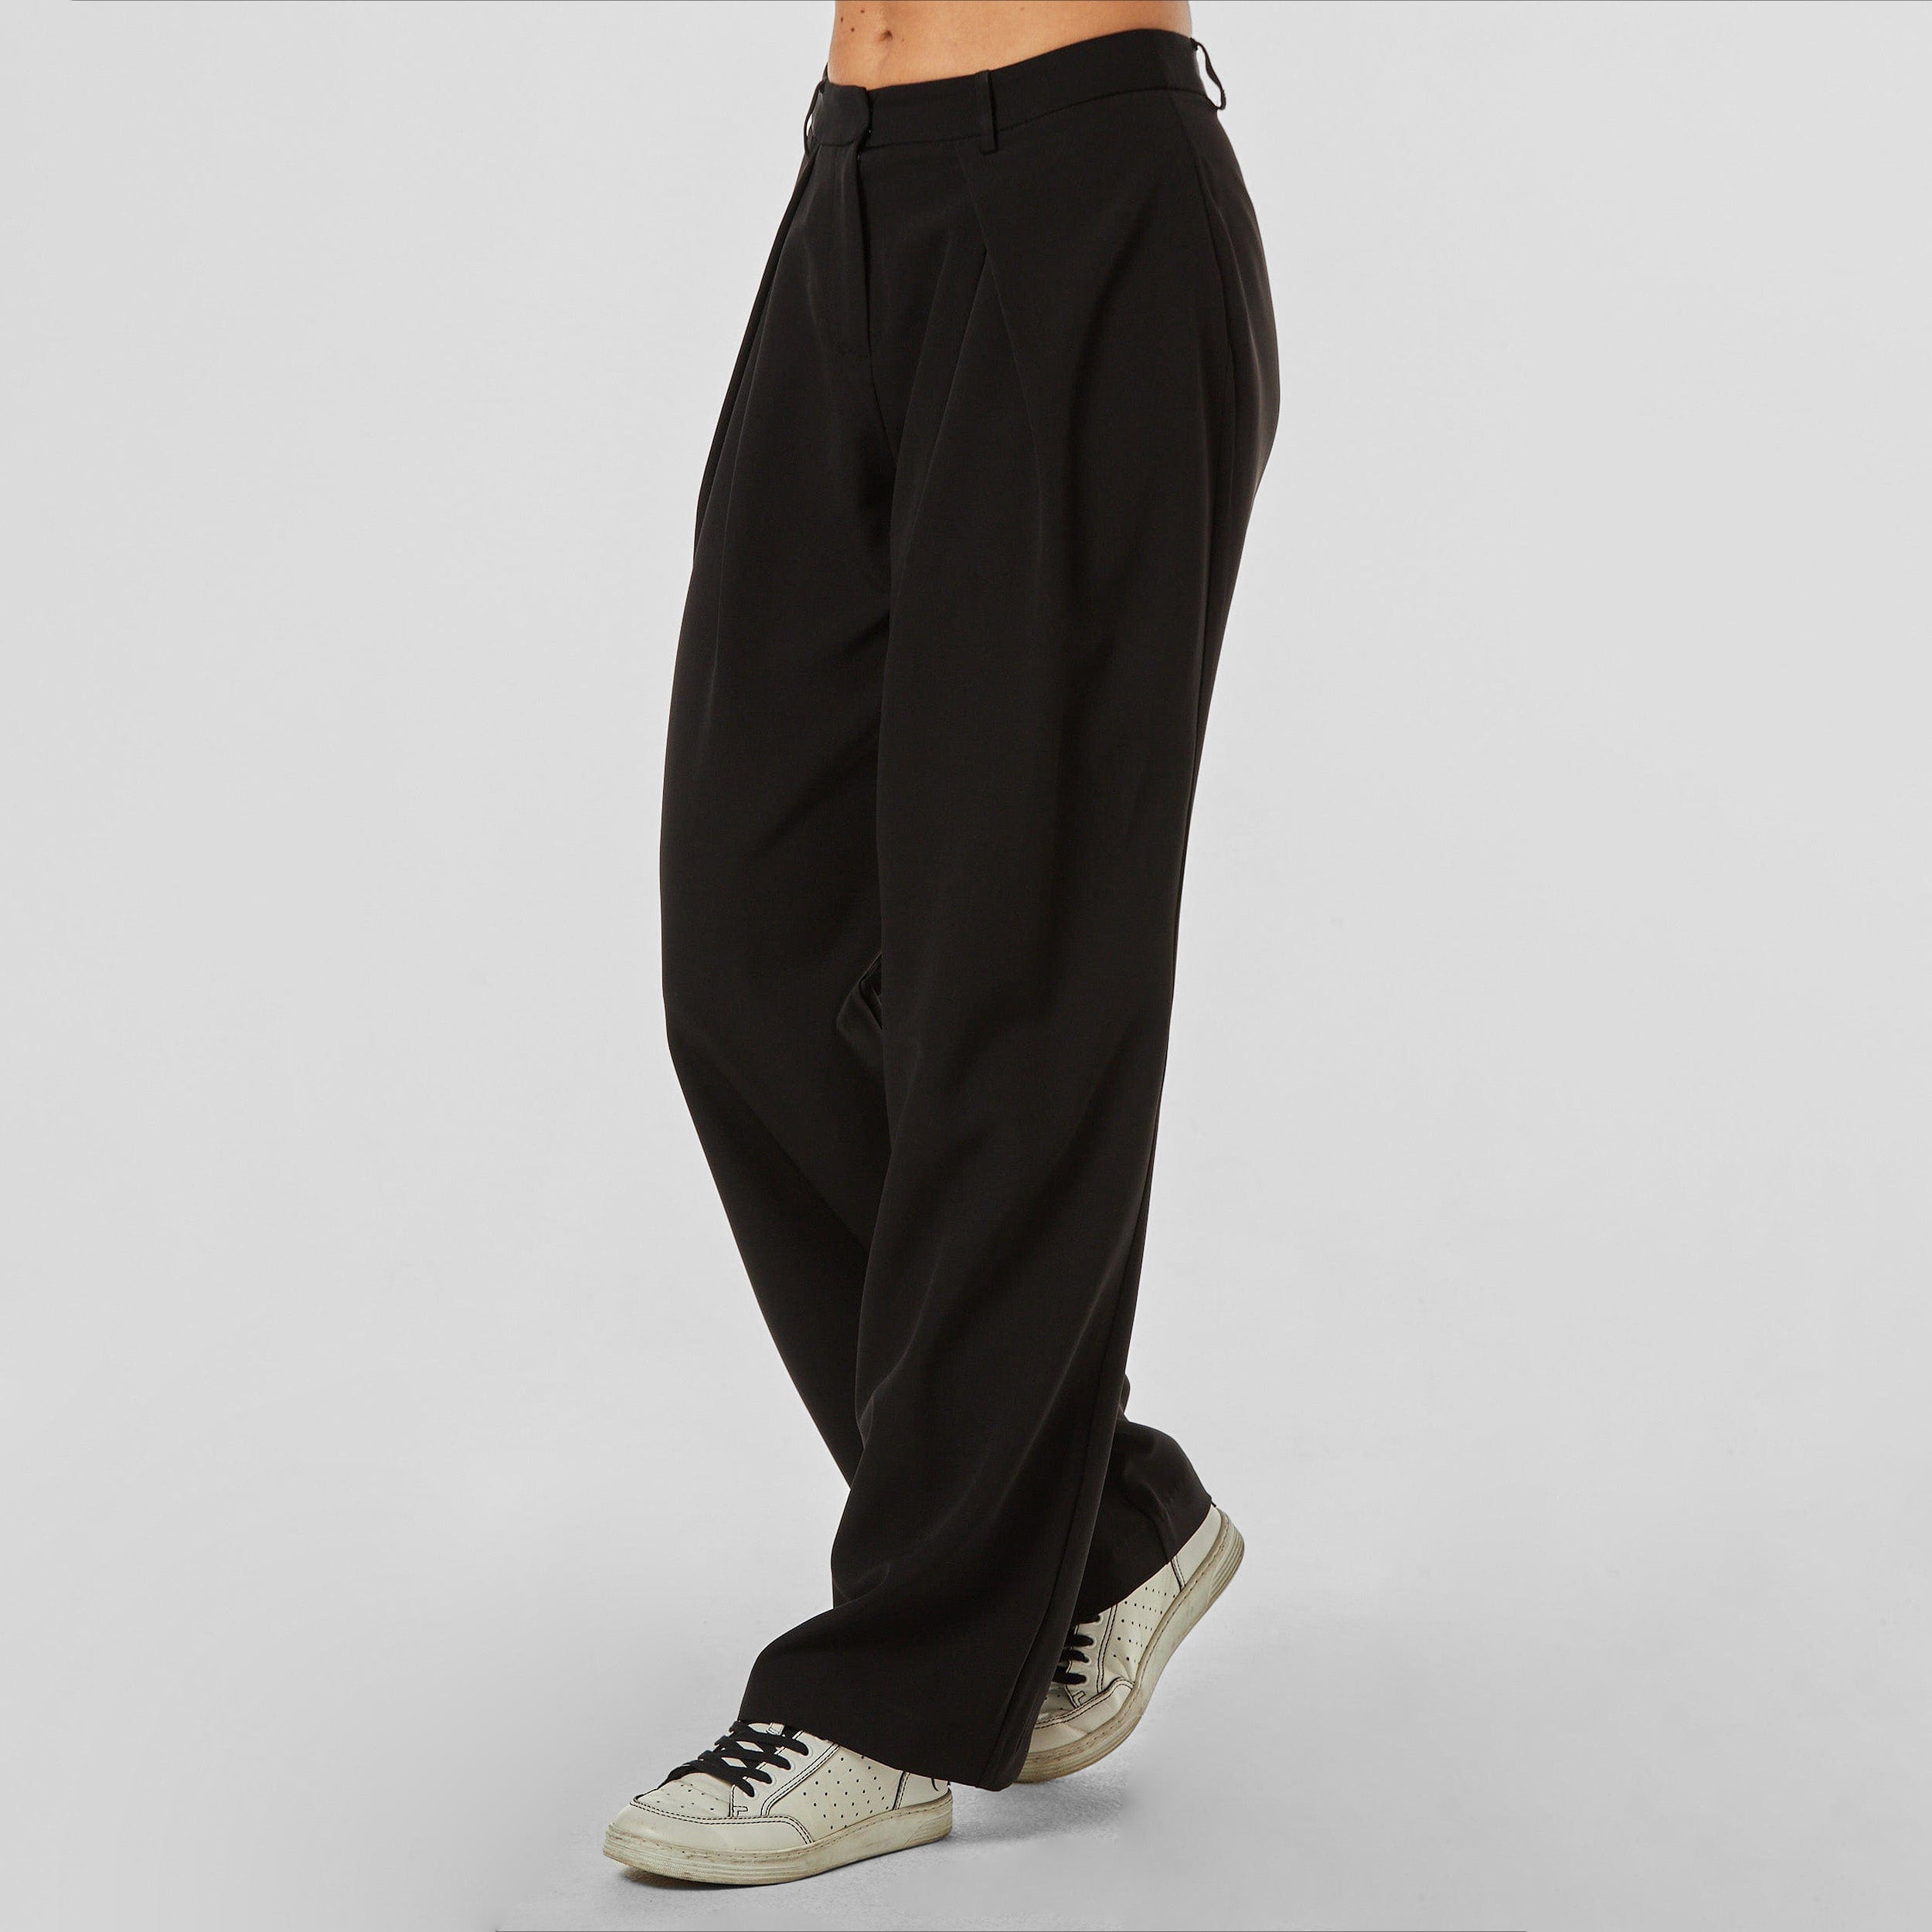 Side view of woman wearing pleated black trousers with stretch fabric